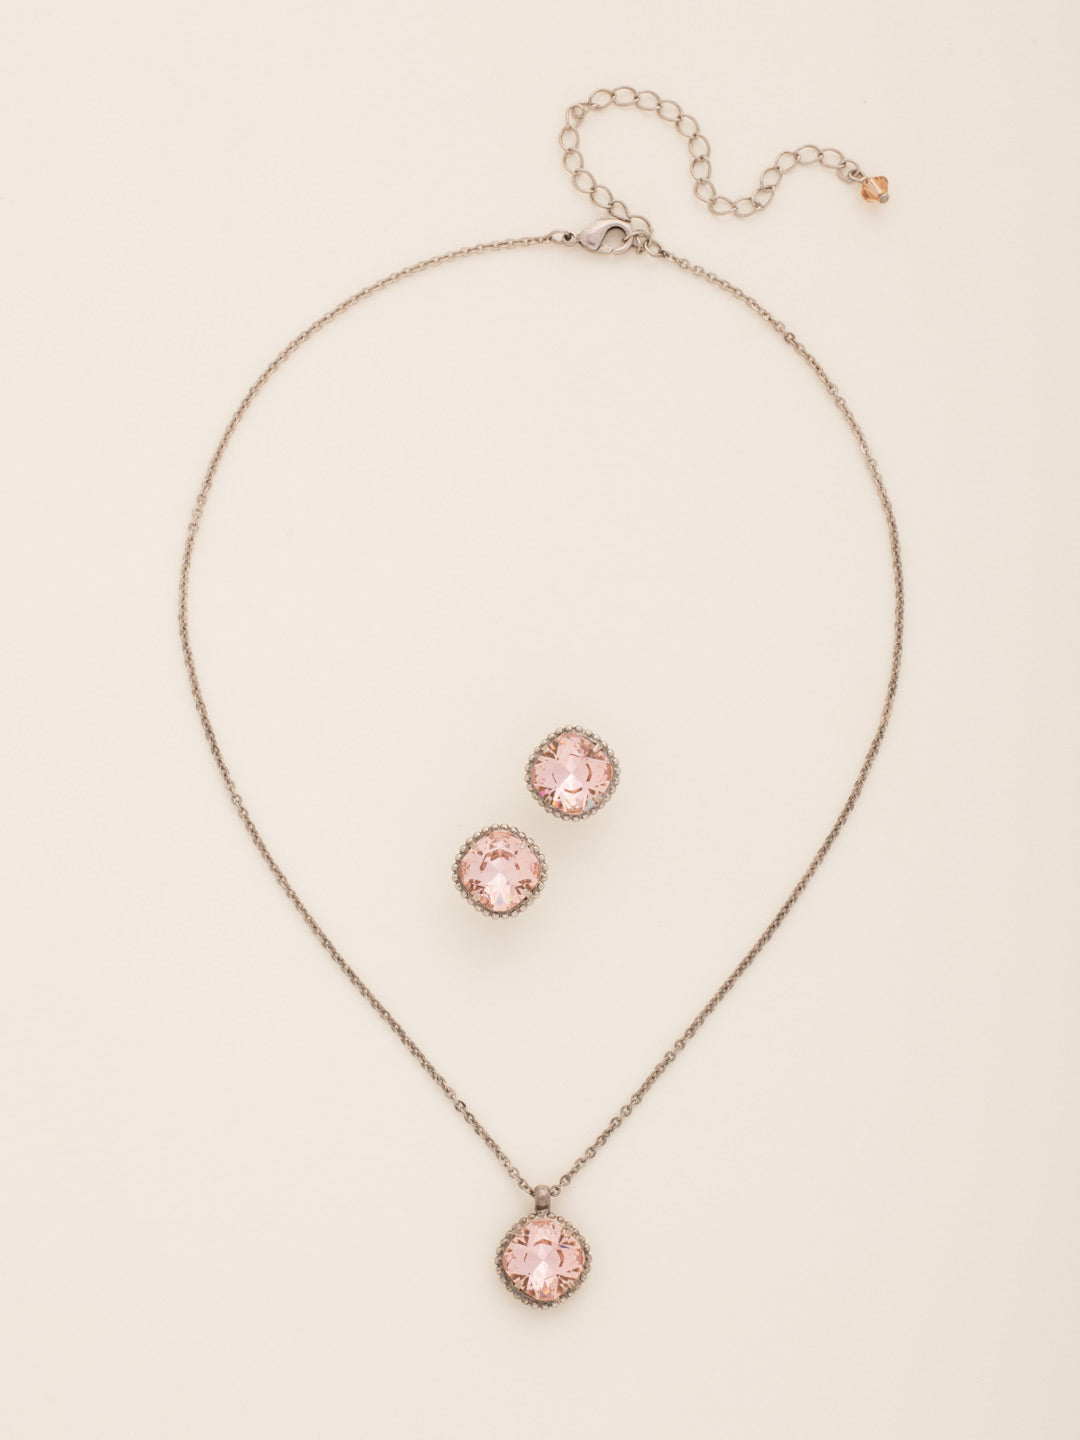 Cushion-Cut Solitaire Necklace and Earring Gift Set - GCT68ASSND